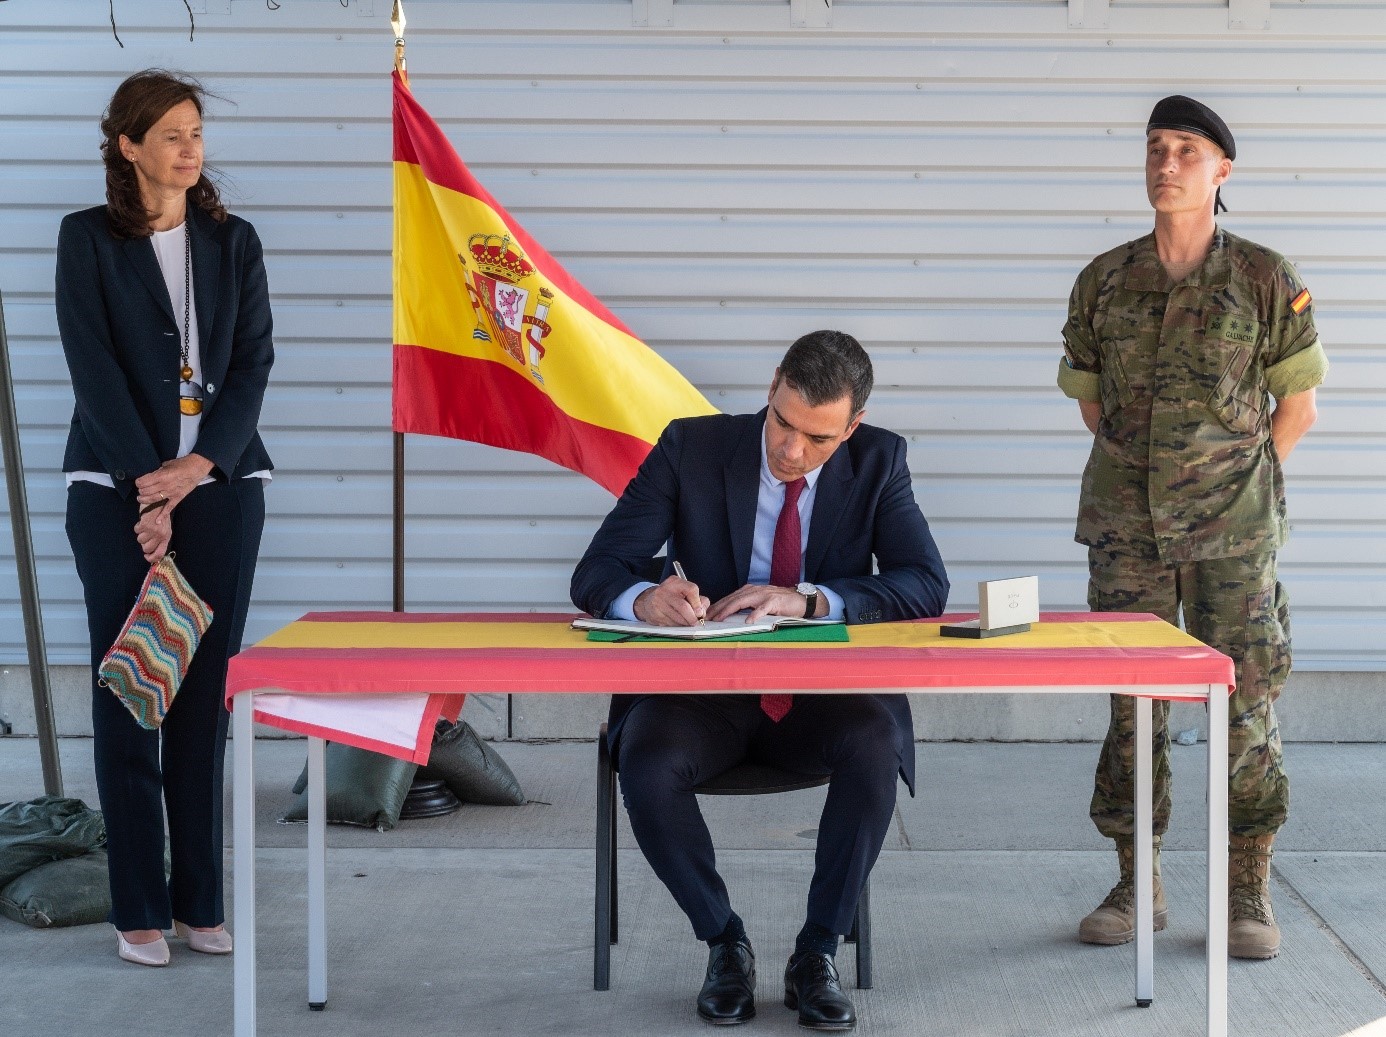 Spain's PM signing the book of honour